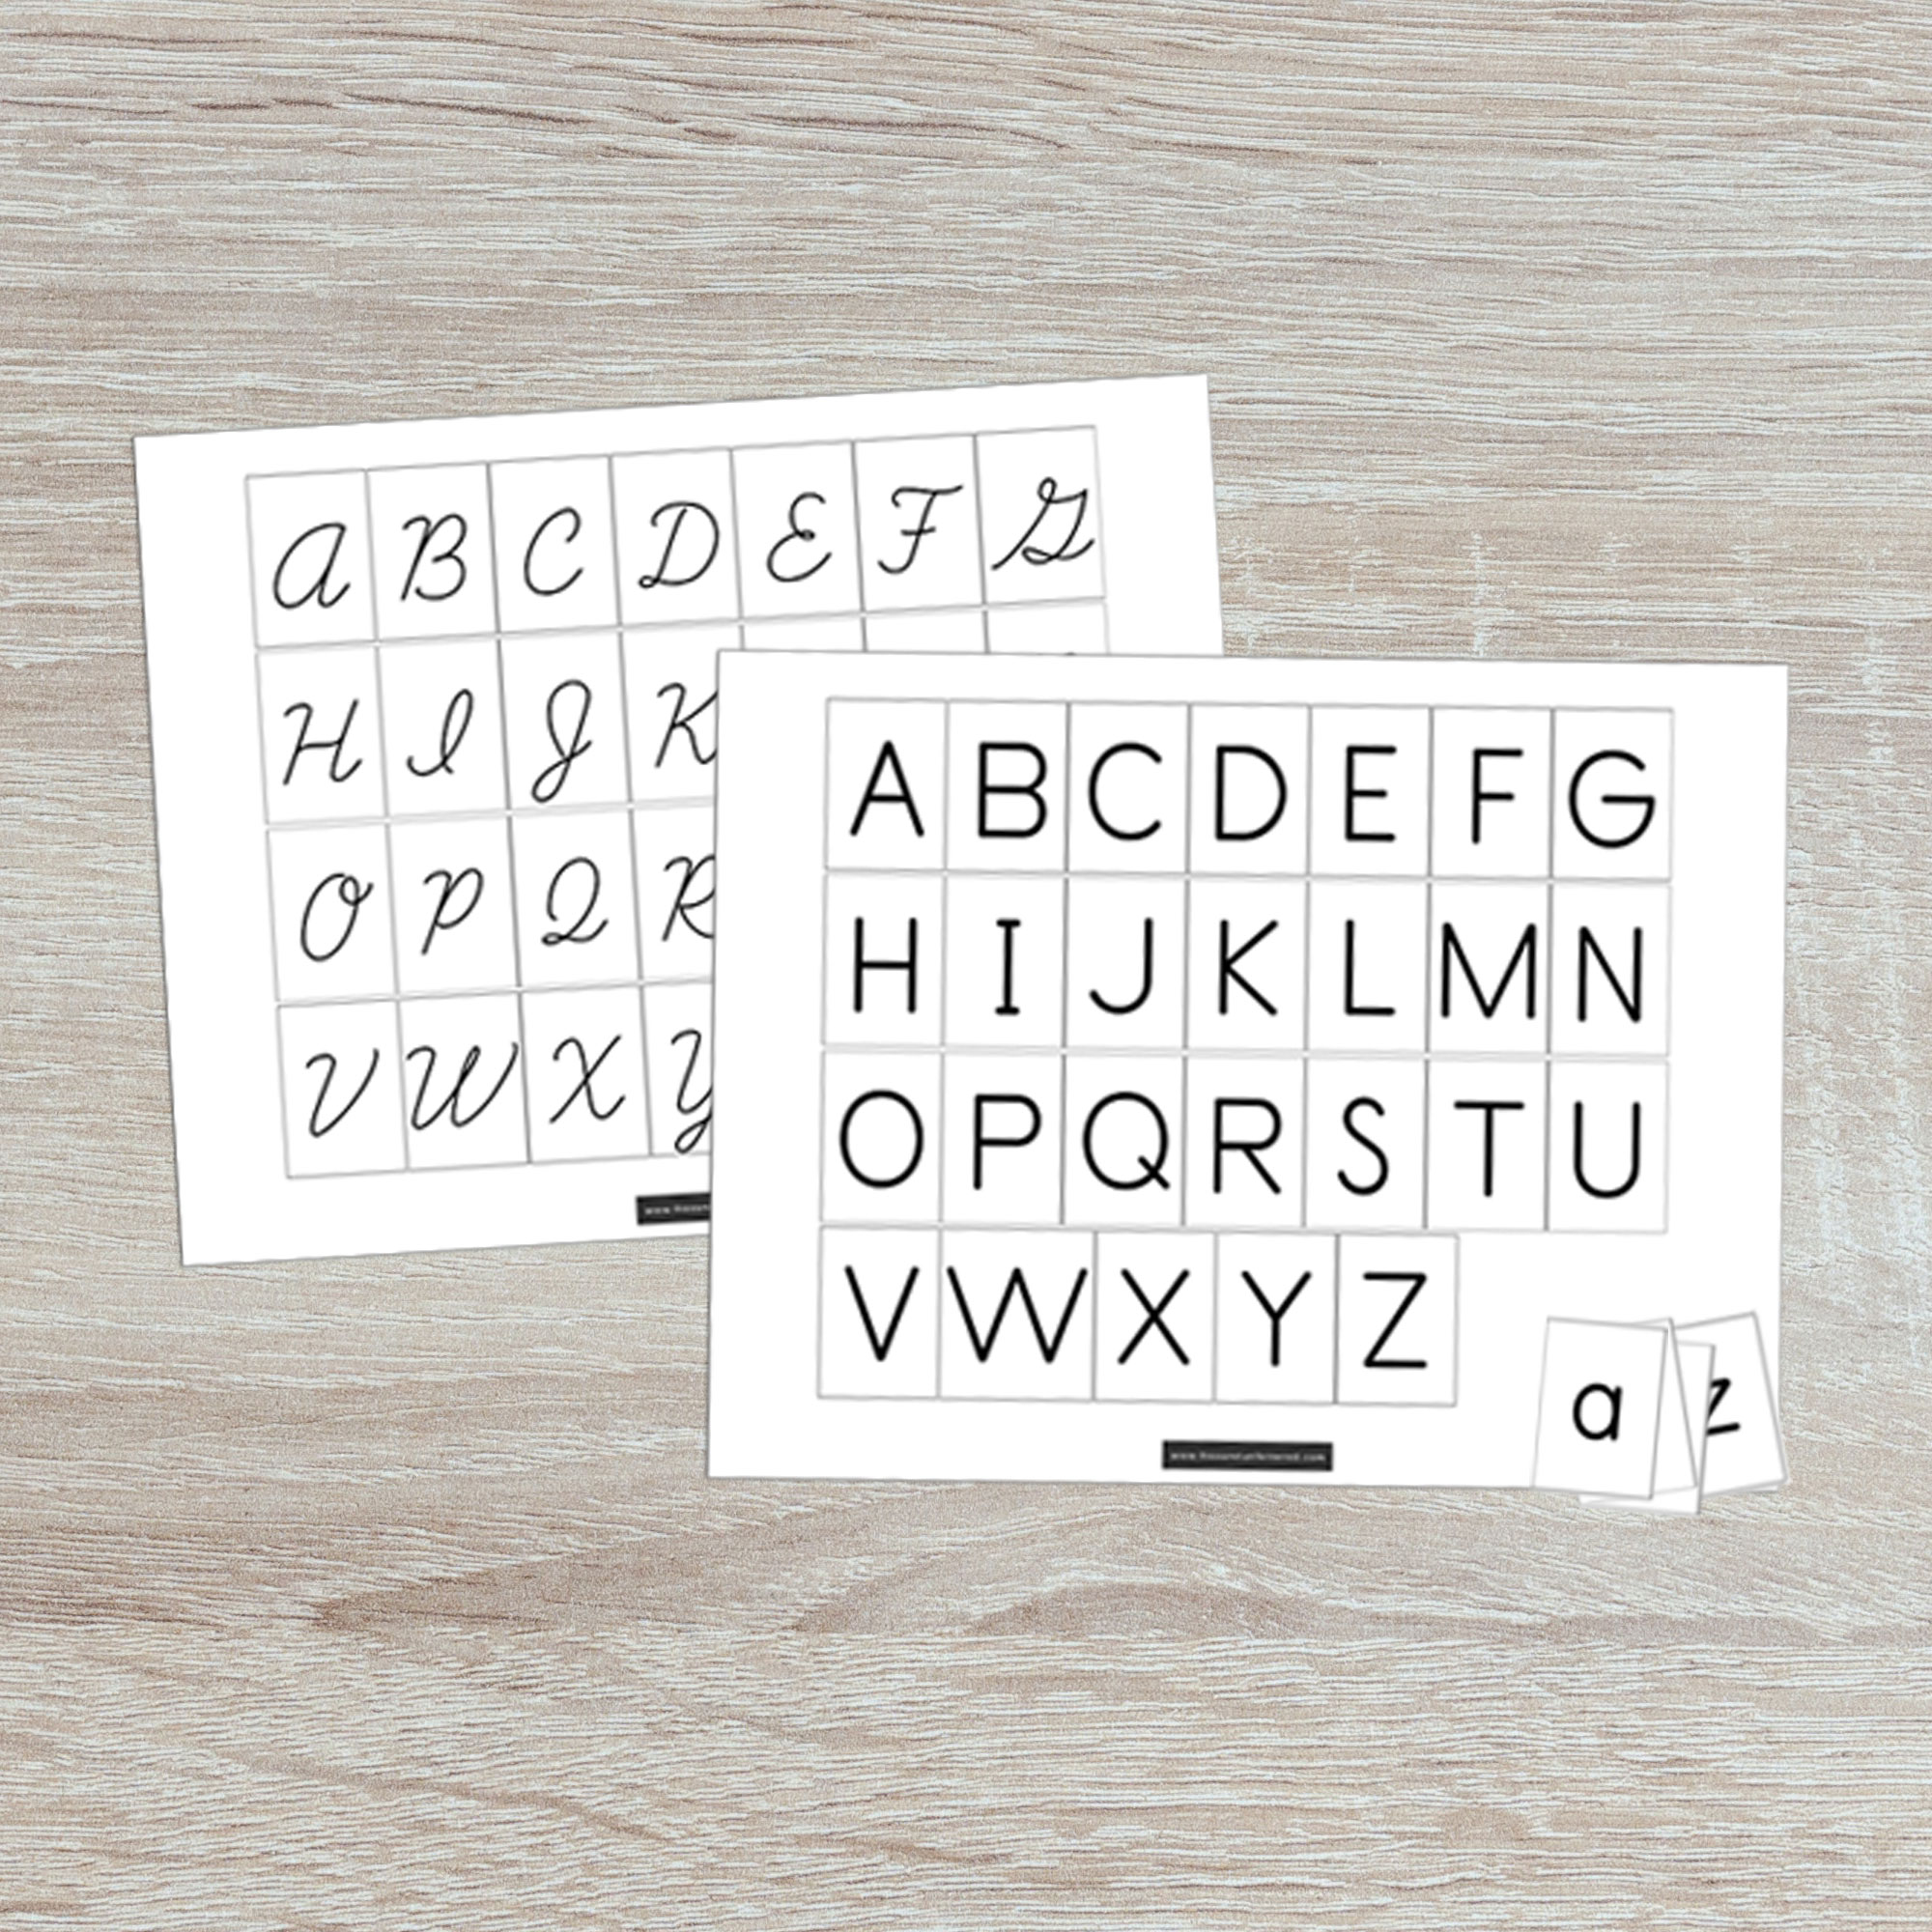 Free Printable: Uppercase and Lowercase Matching Alphabet Mats